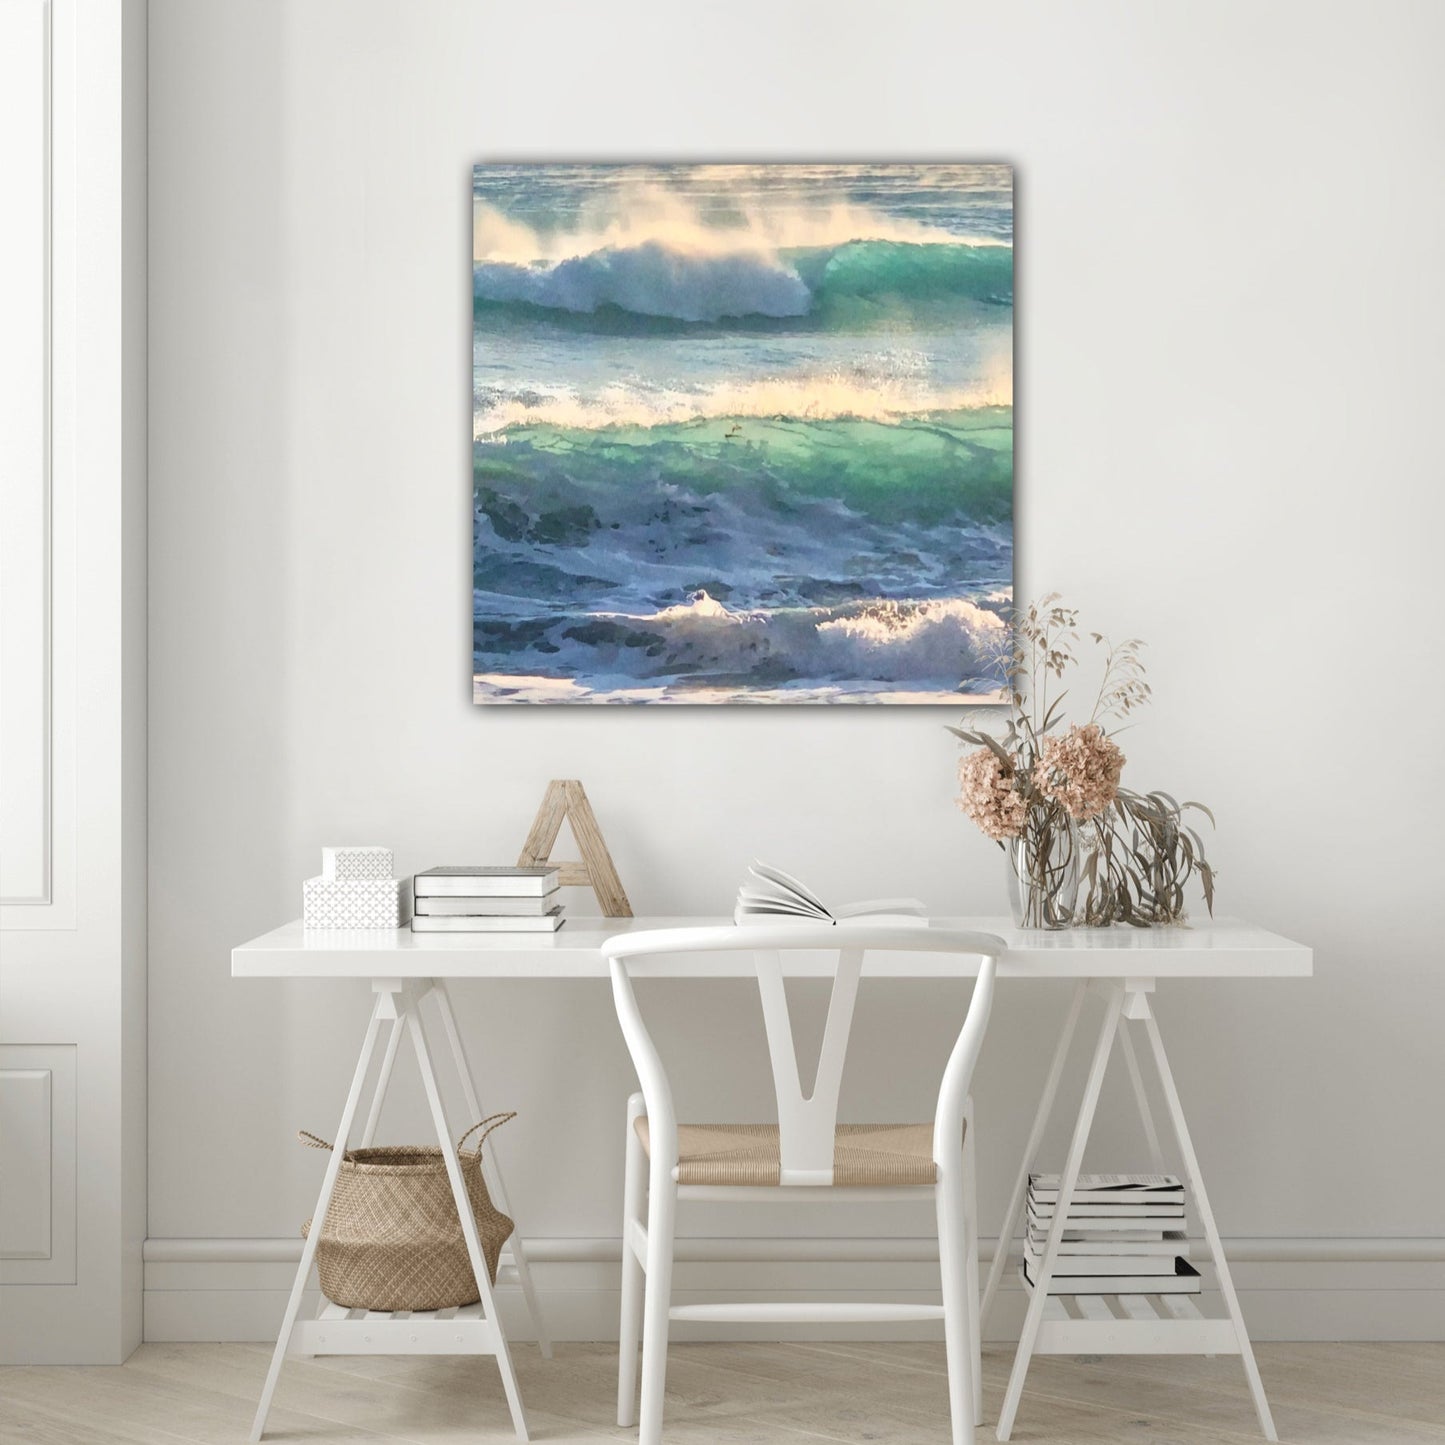 emerald fog canvas print home office decor by Jacqueline mb designs 